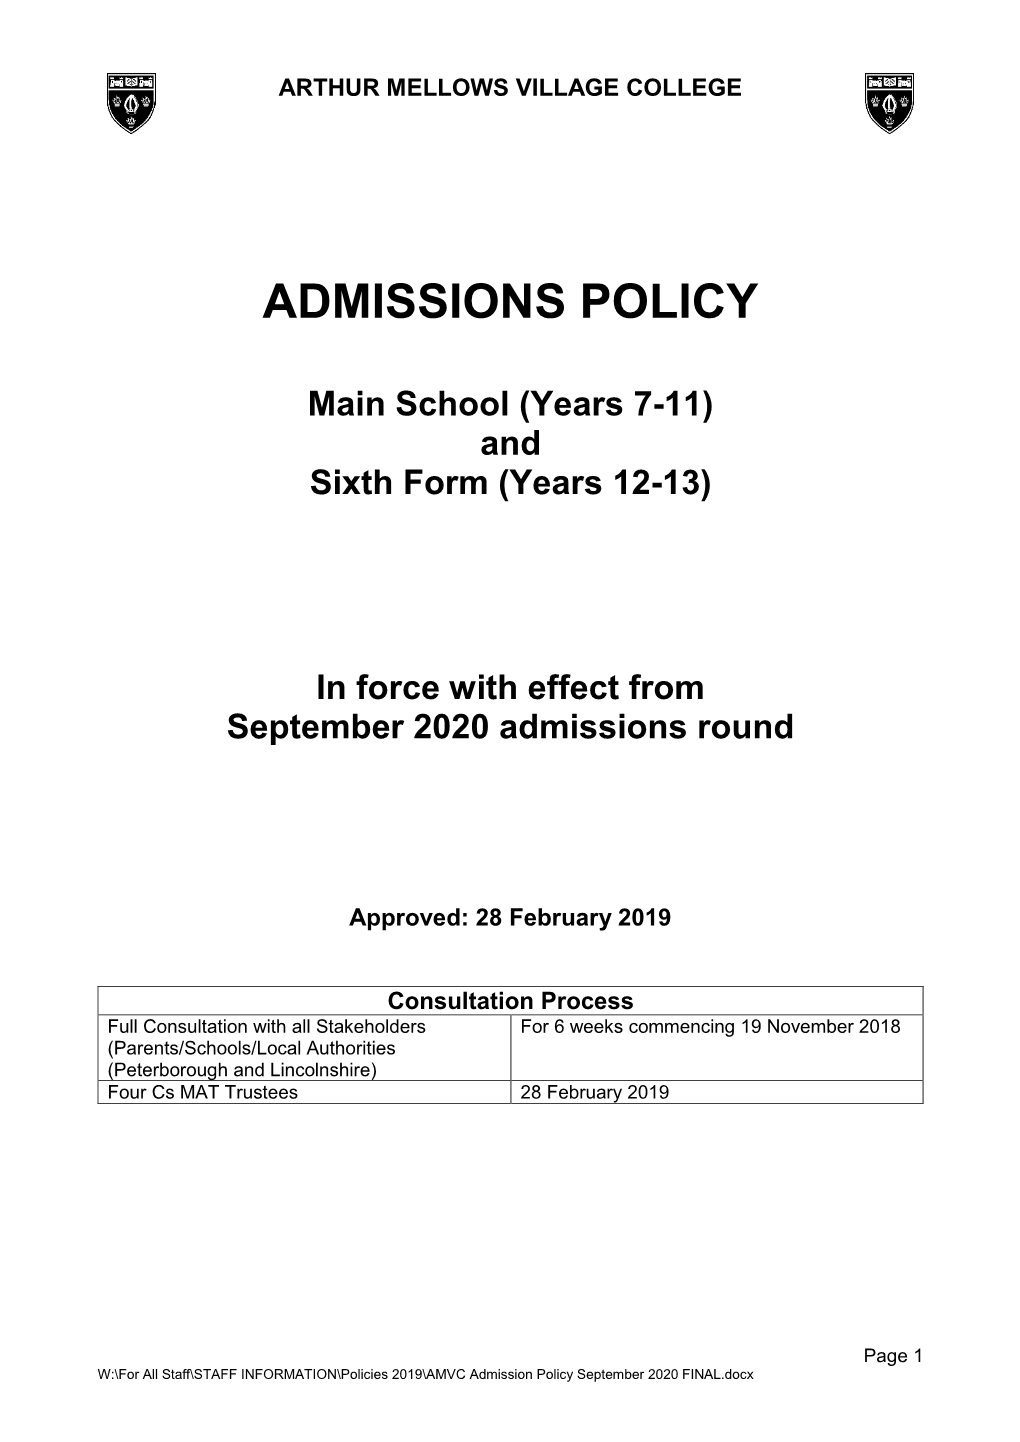 And Sixth Form (Years 12-13) in Force with Effect from September 2020 Admissions Round